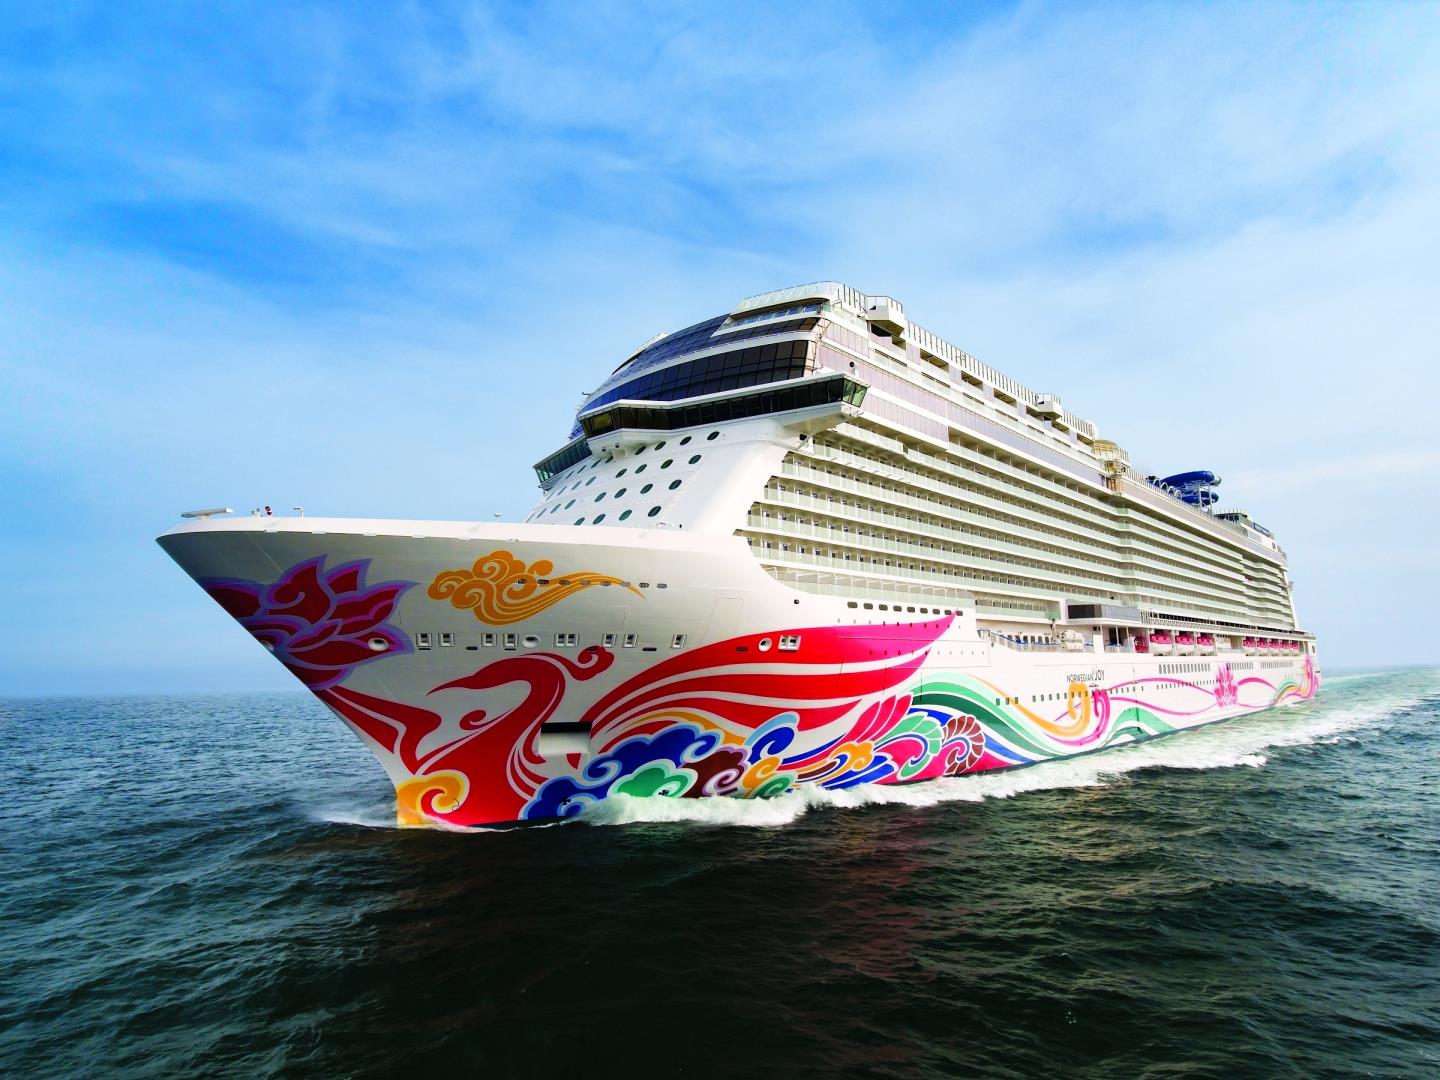 16-day Cruise to Panama Canal: Mexico & Colombia from Los Angeles, California on Norwegian Joy